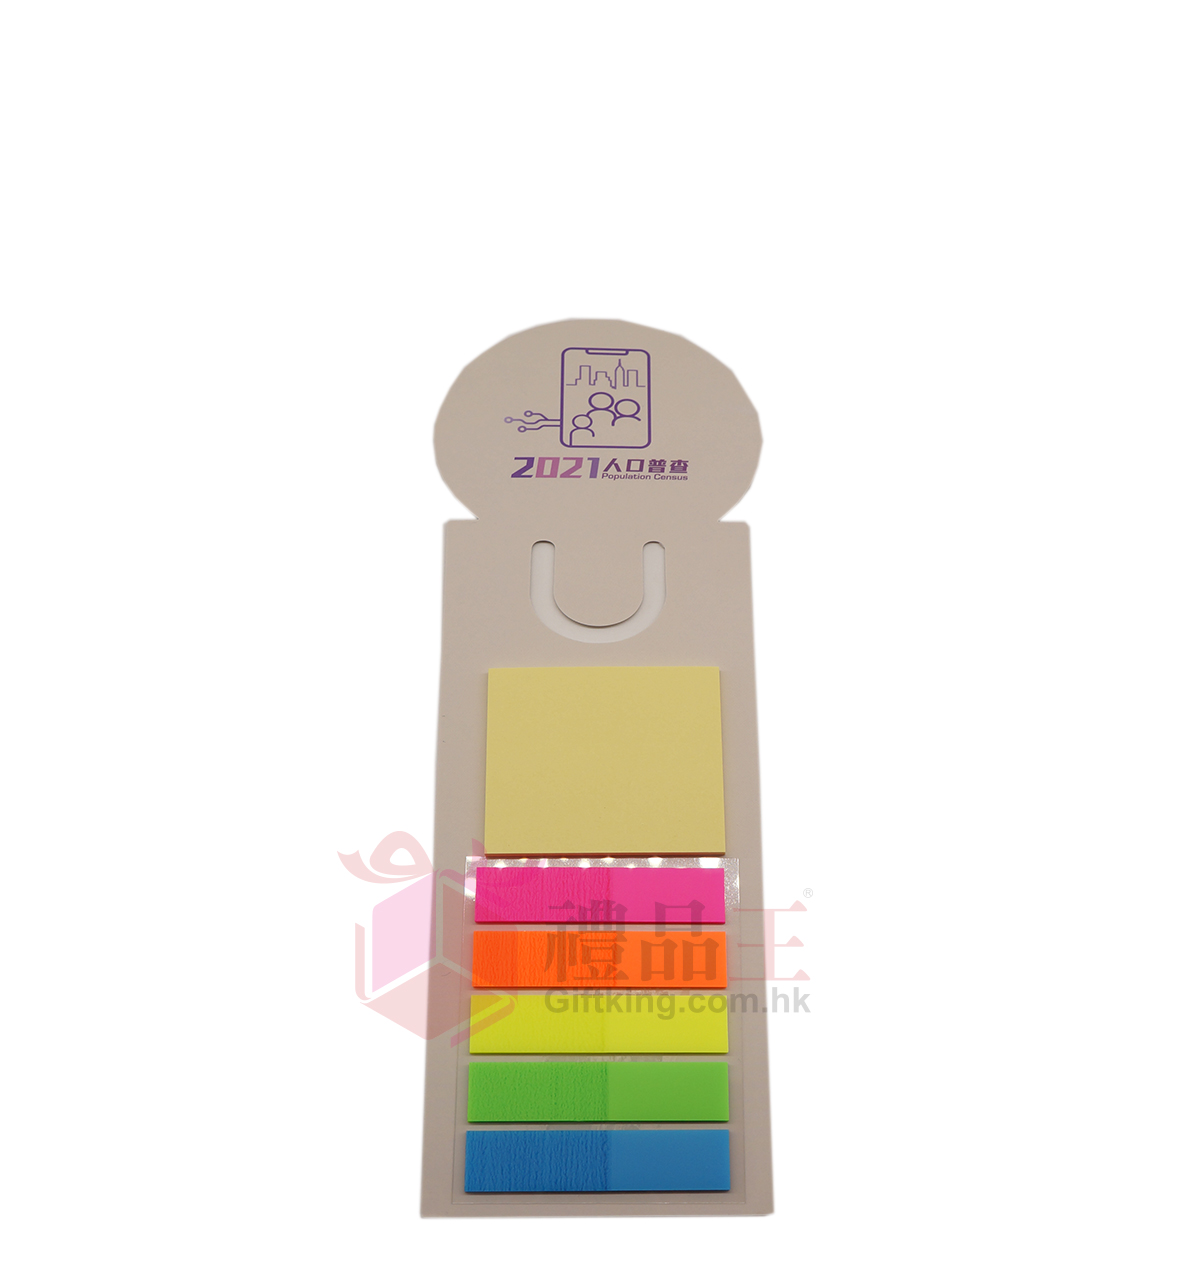 Census and Statistics Department 2021 census Scale Sticky Note (Stationery Gifts)